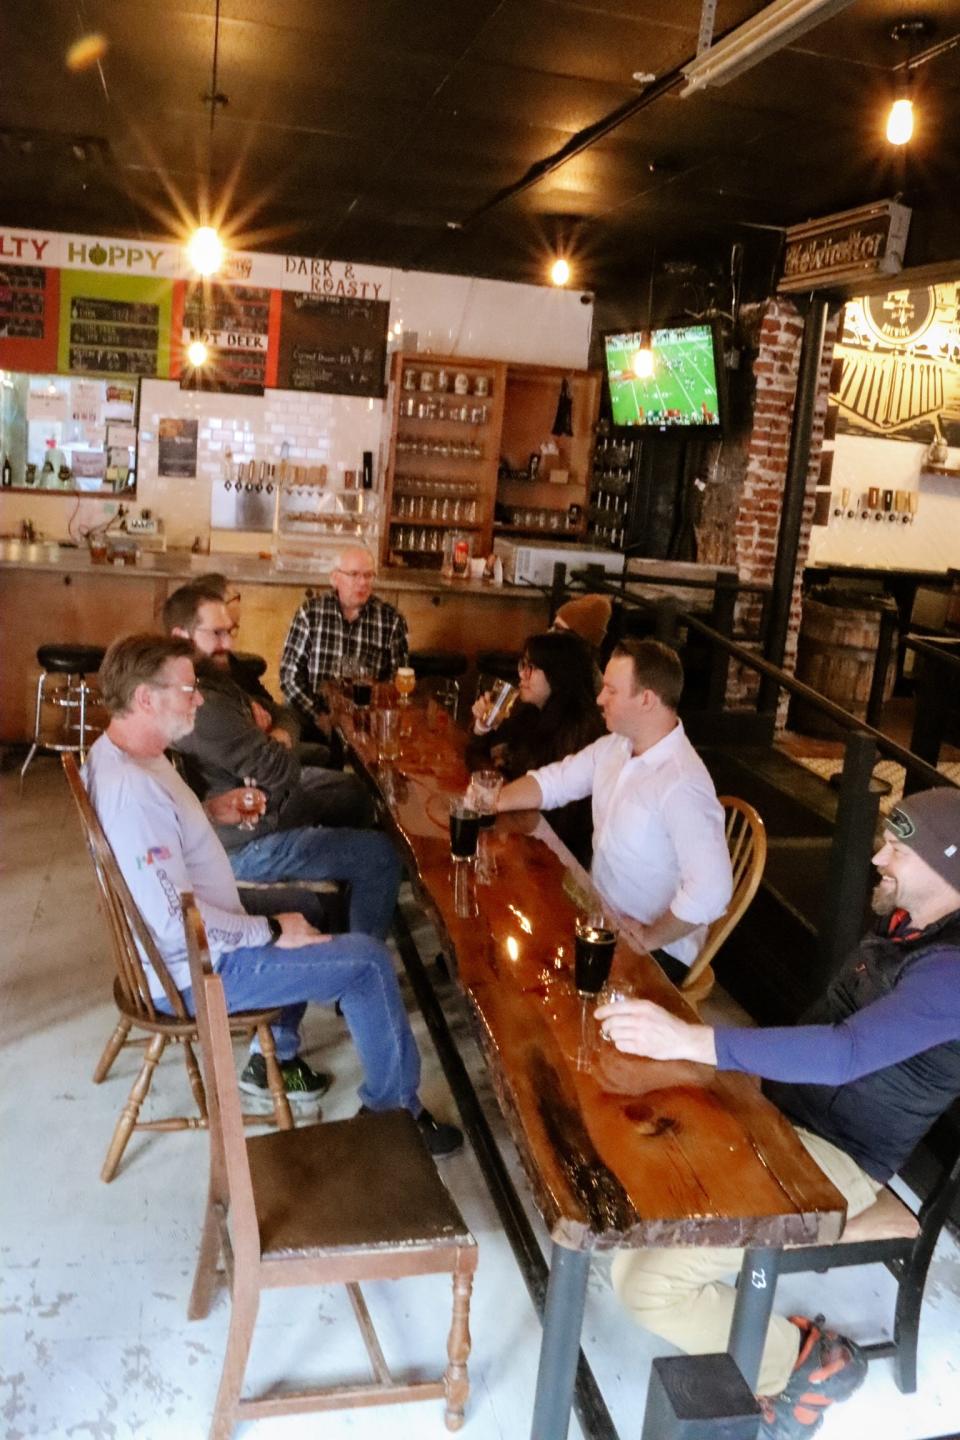 The taproom at Jackson Street Brewing is in a 100-year-old building in downtown Sioux City, which has housed many businesses over the century.